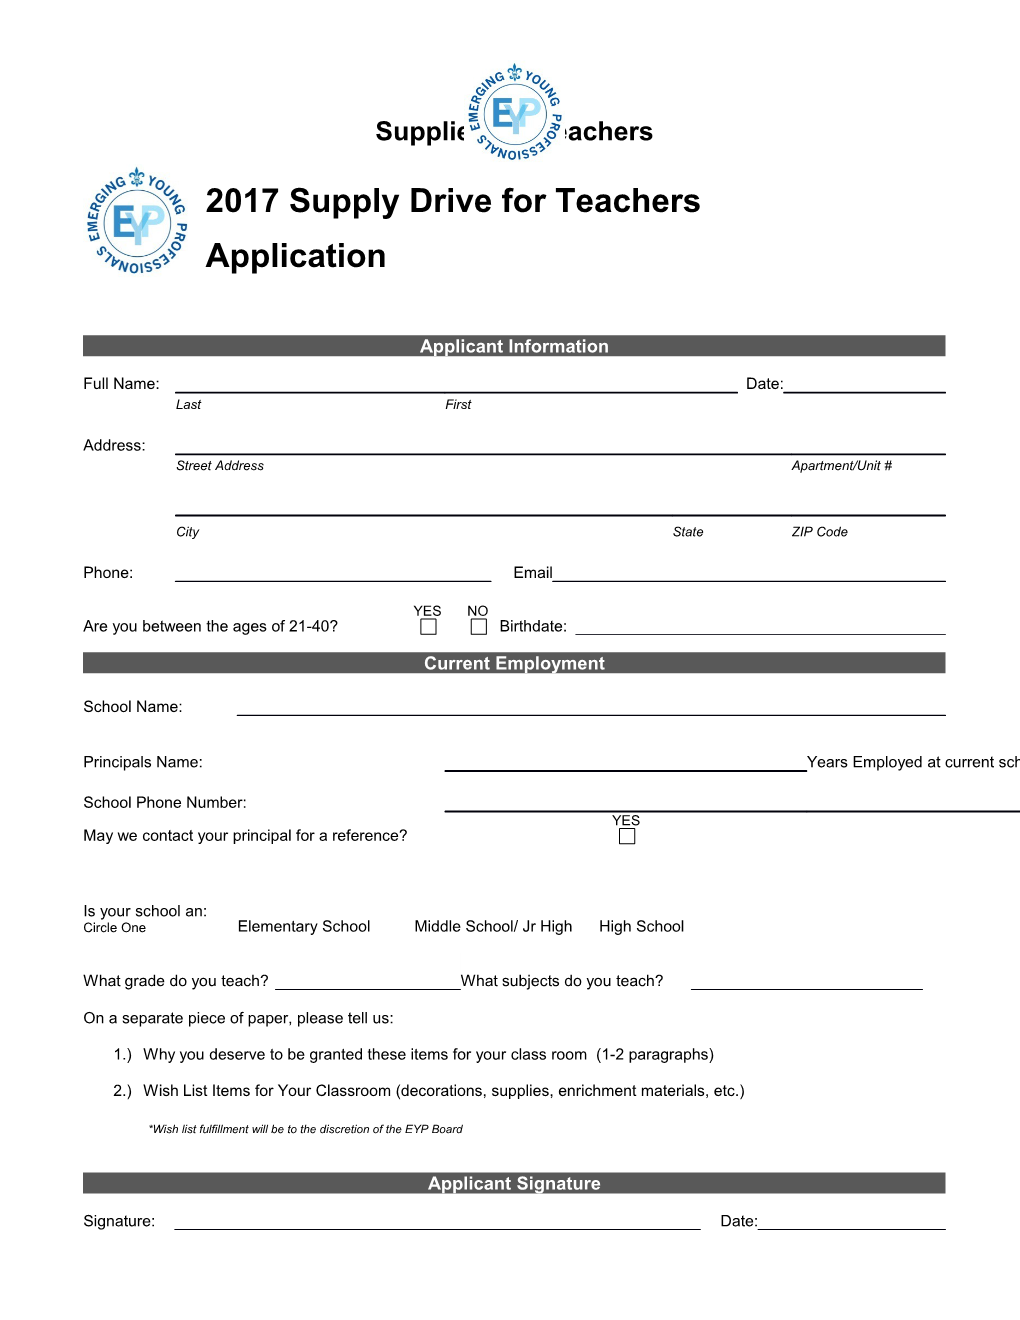 2017 Supply Drive for Teachers